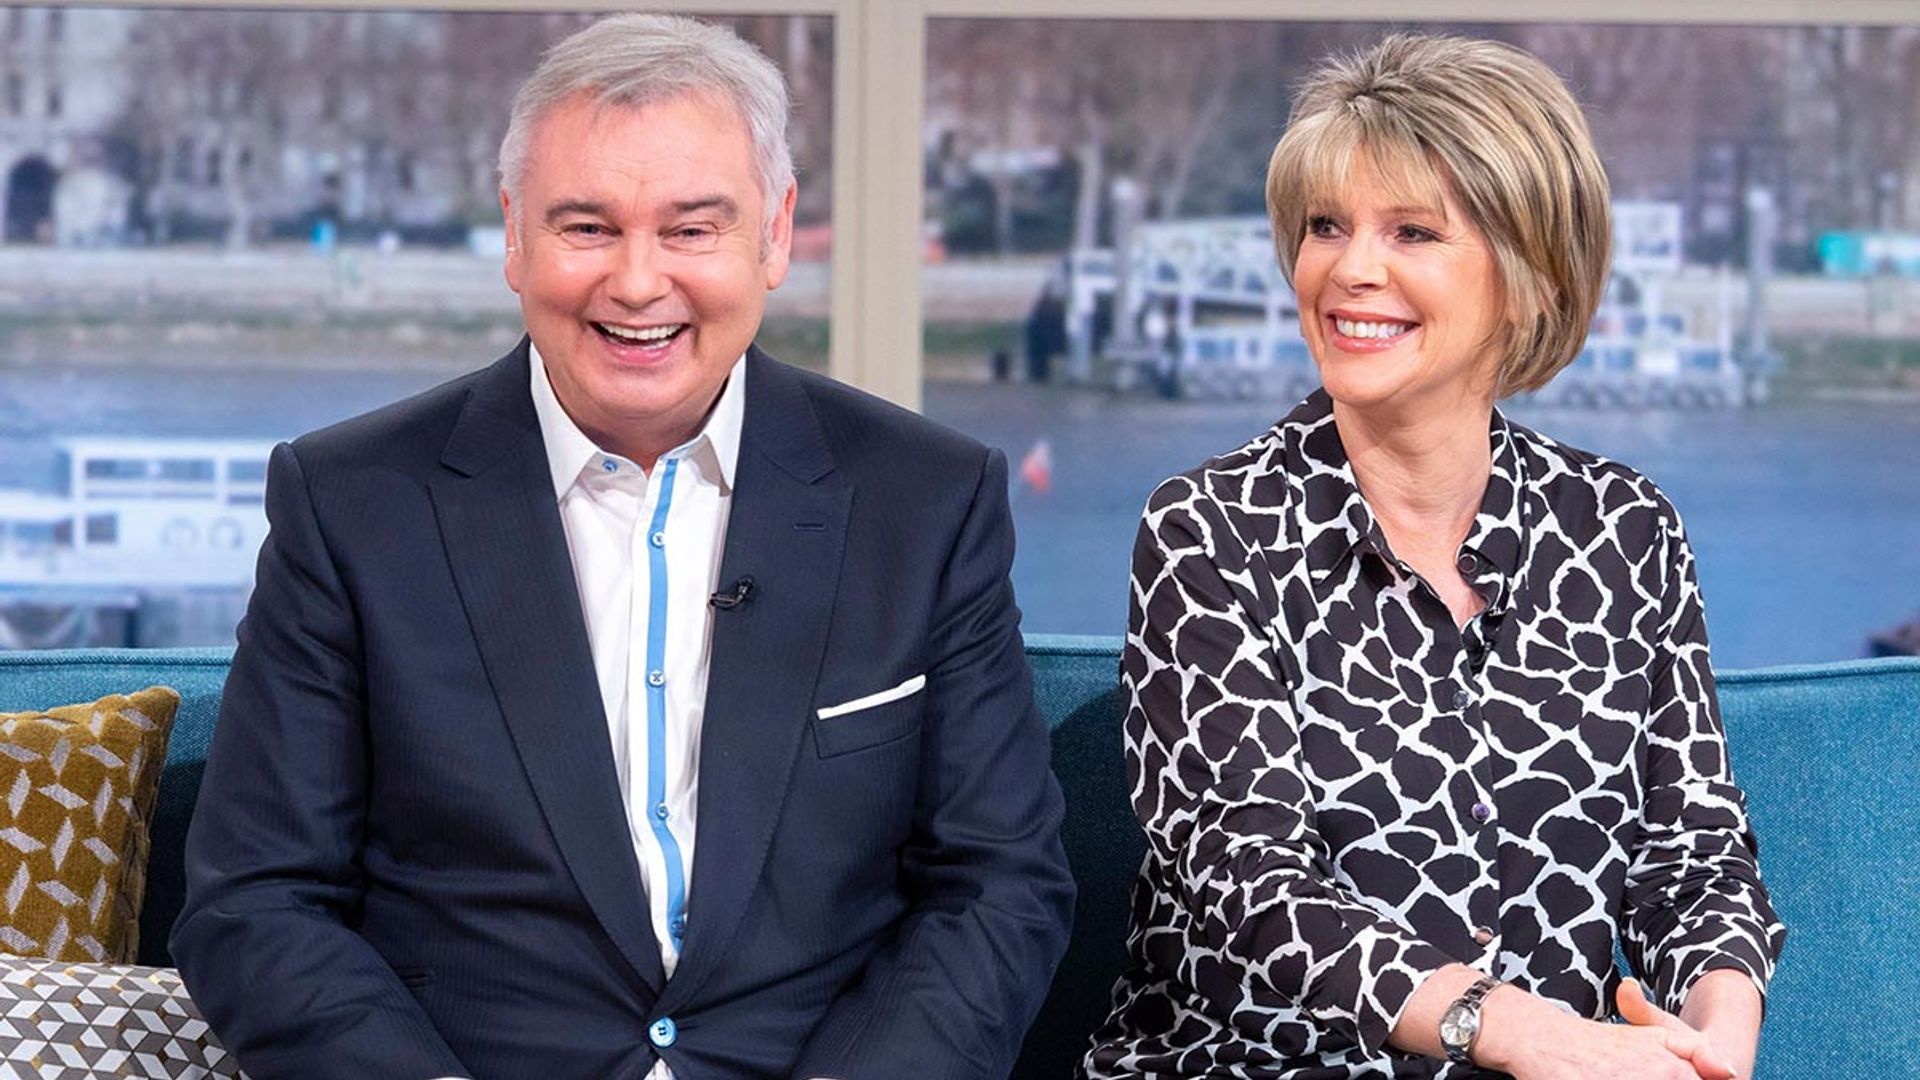 Ruth Langsford reveals challenges of working with husband Eamonn Holmes: 'Eamonn's not a team player'